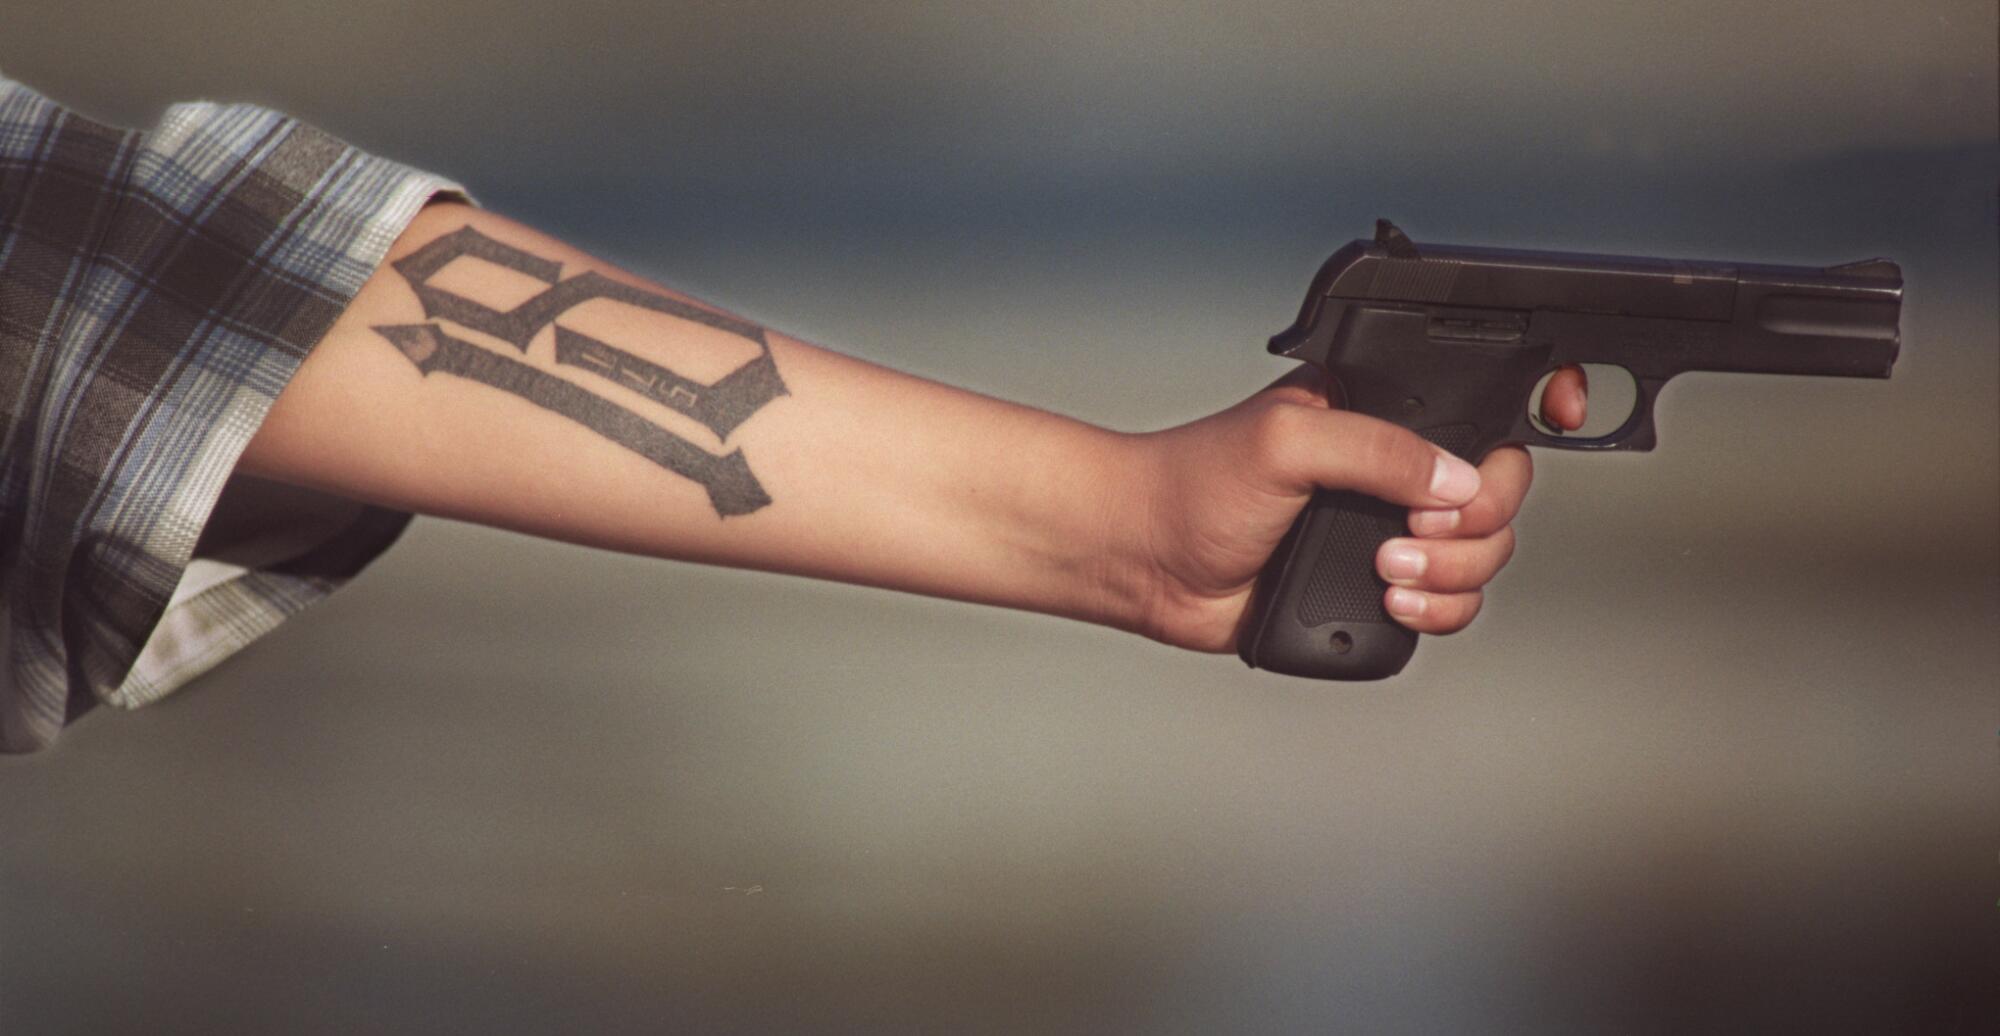 From the elbow, the tattooed arm of a gang member is shown holding a gun.